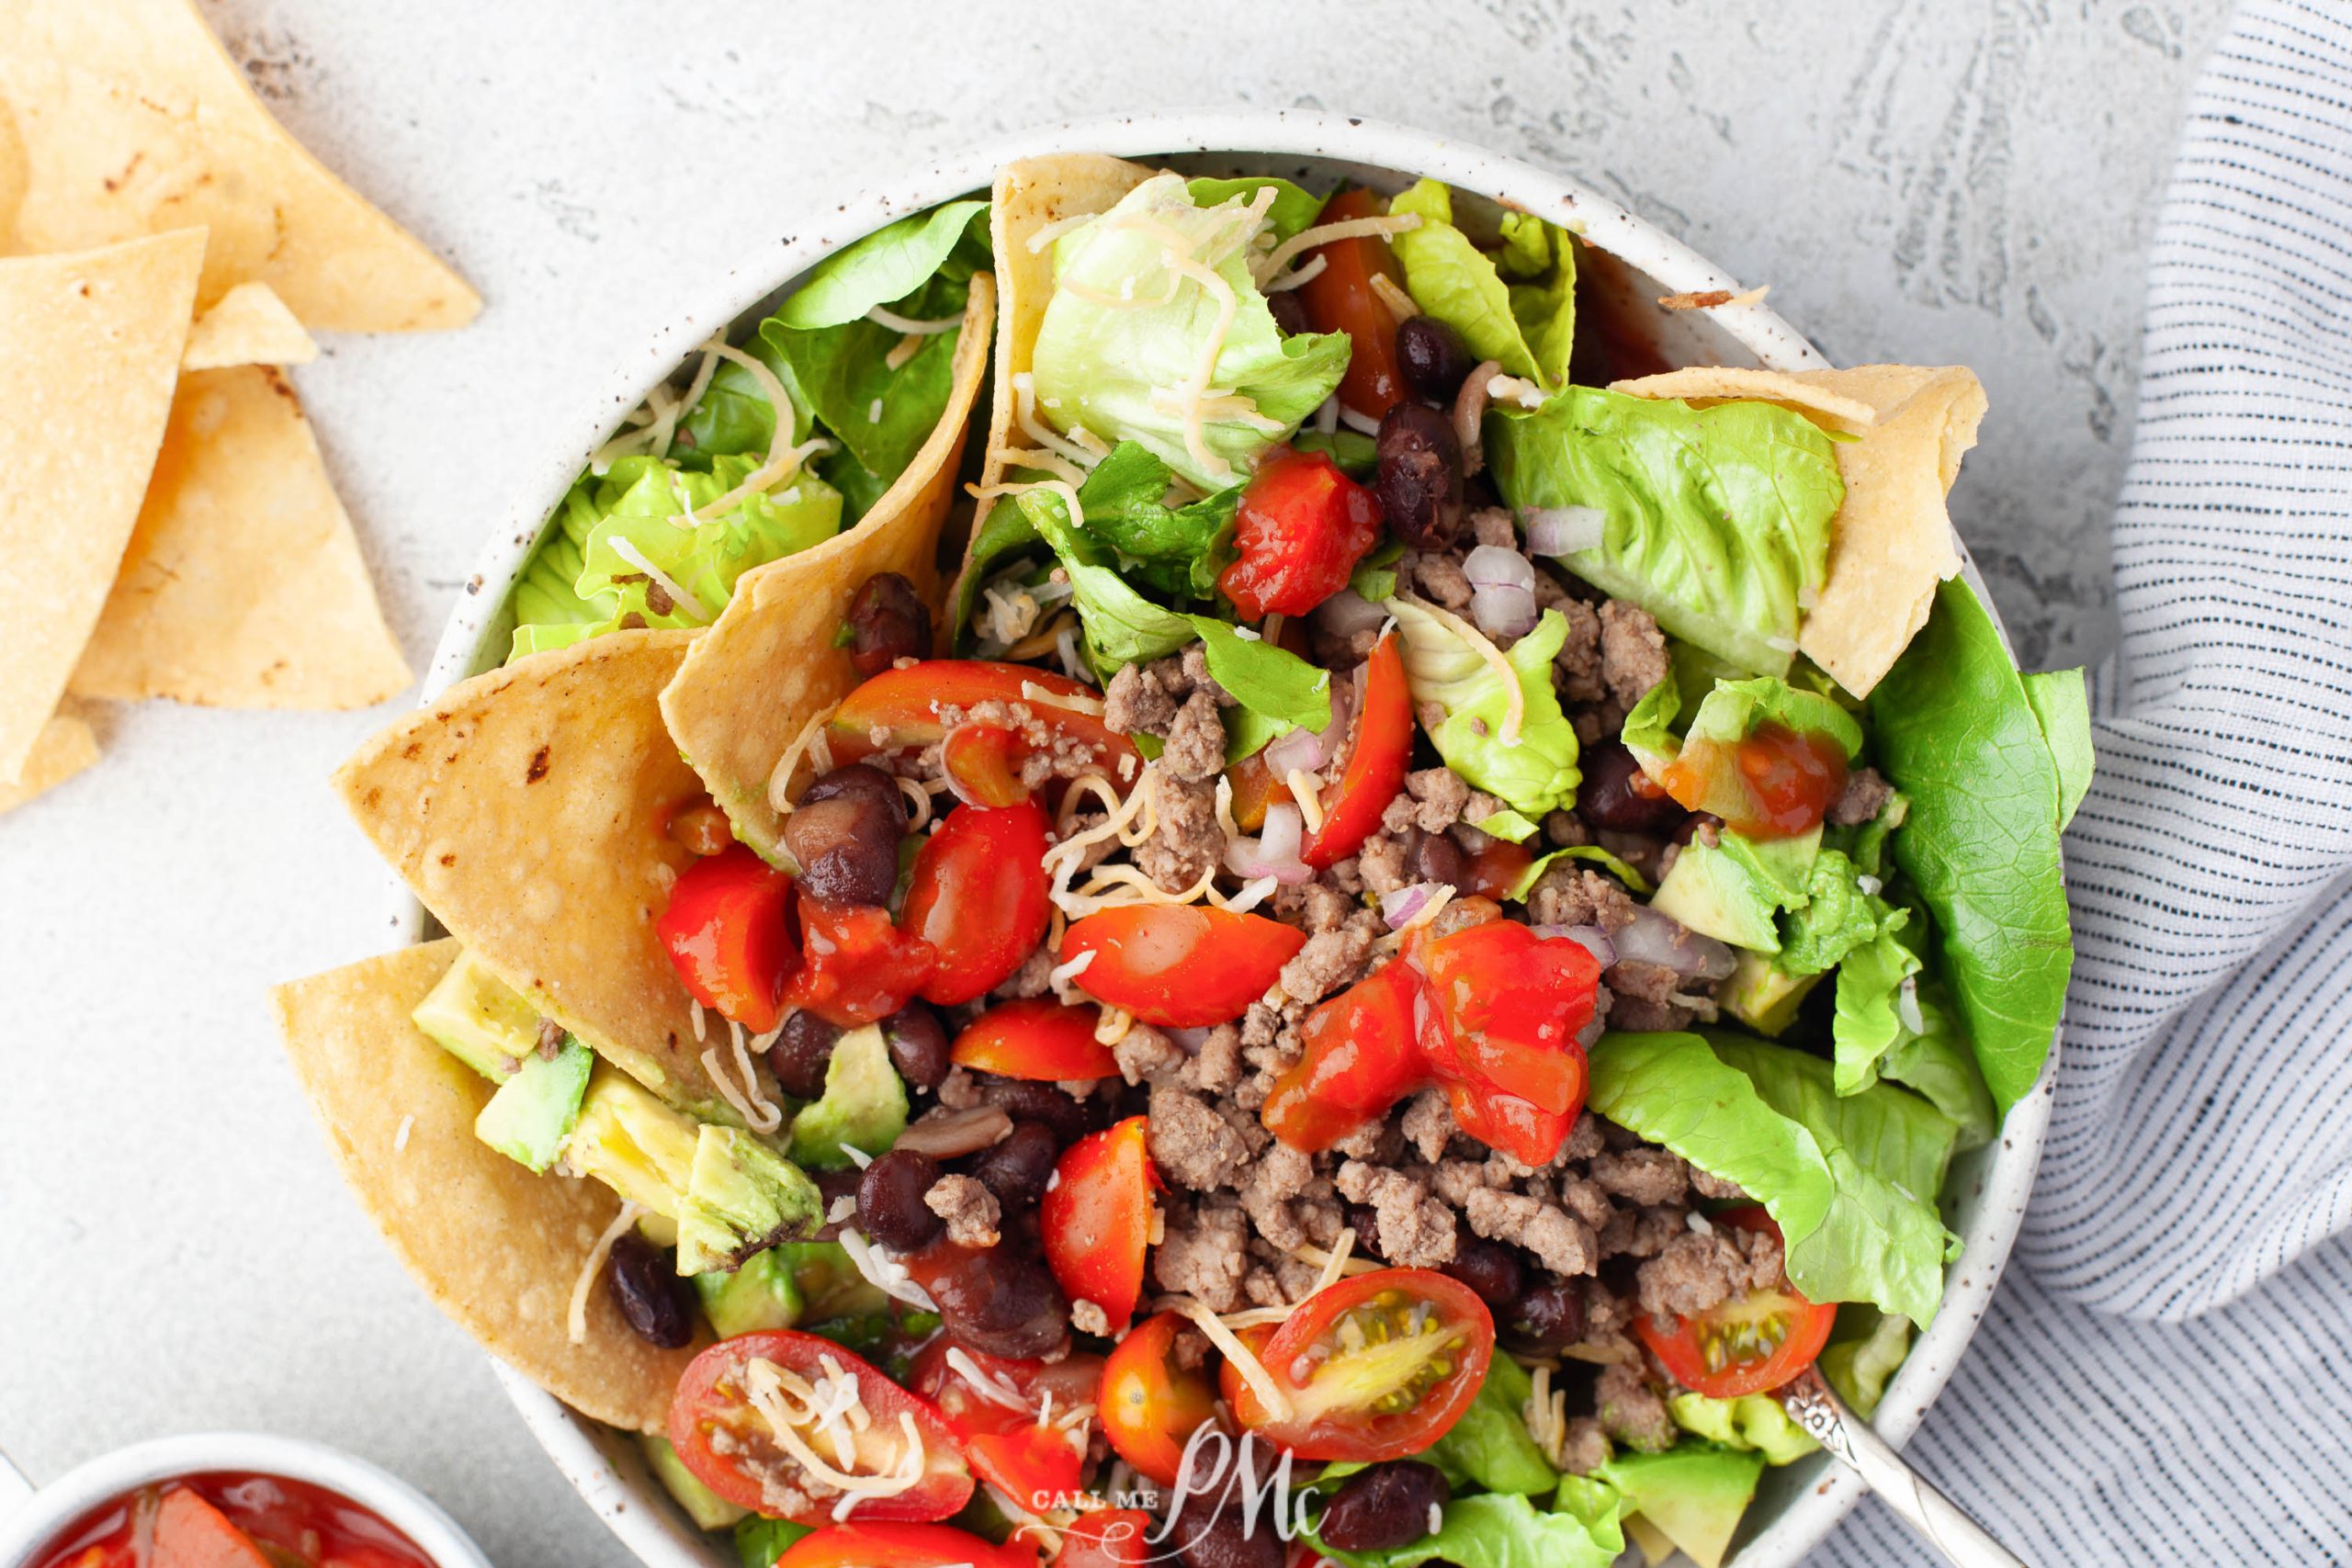 A bowl of taco salad with black beans, tomatoes, lettuce and tortilla chips.